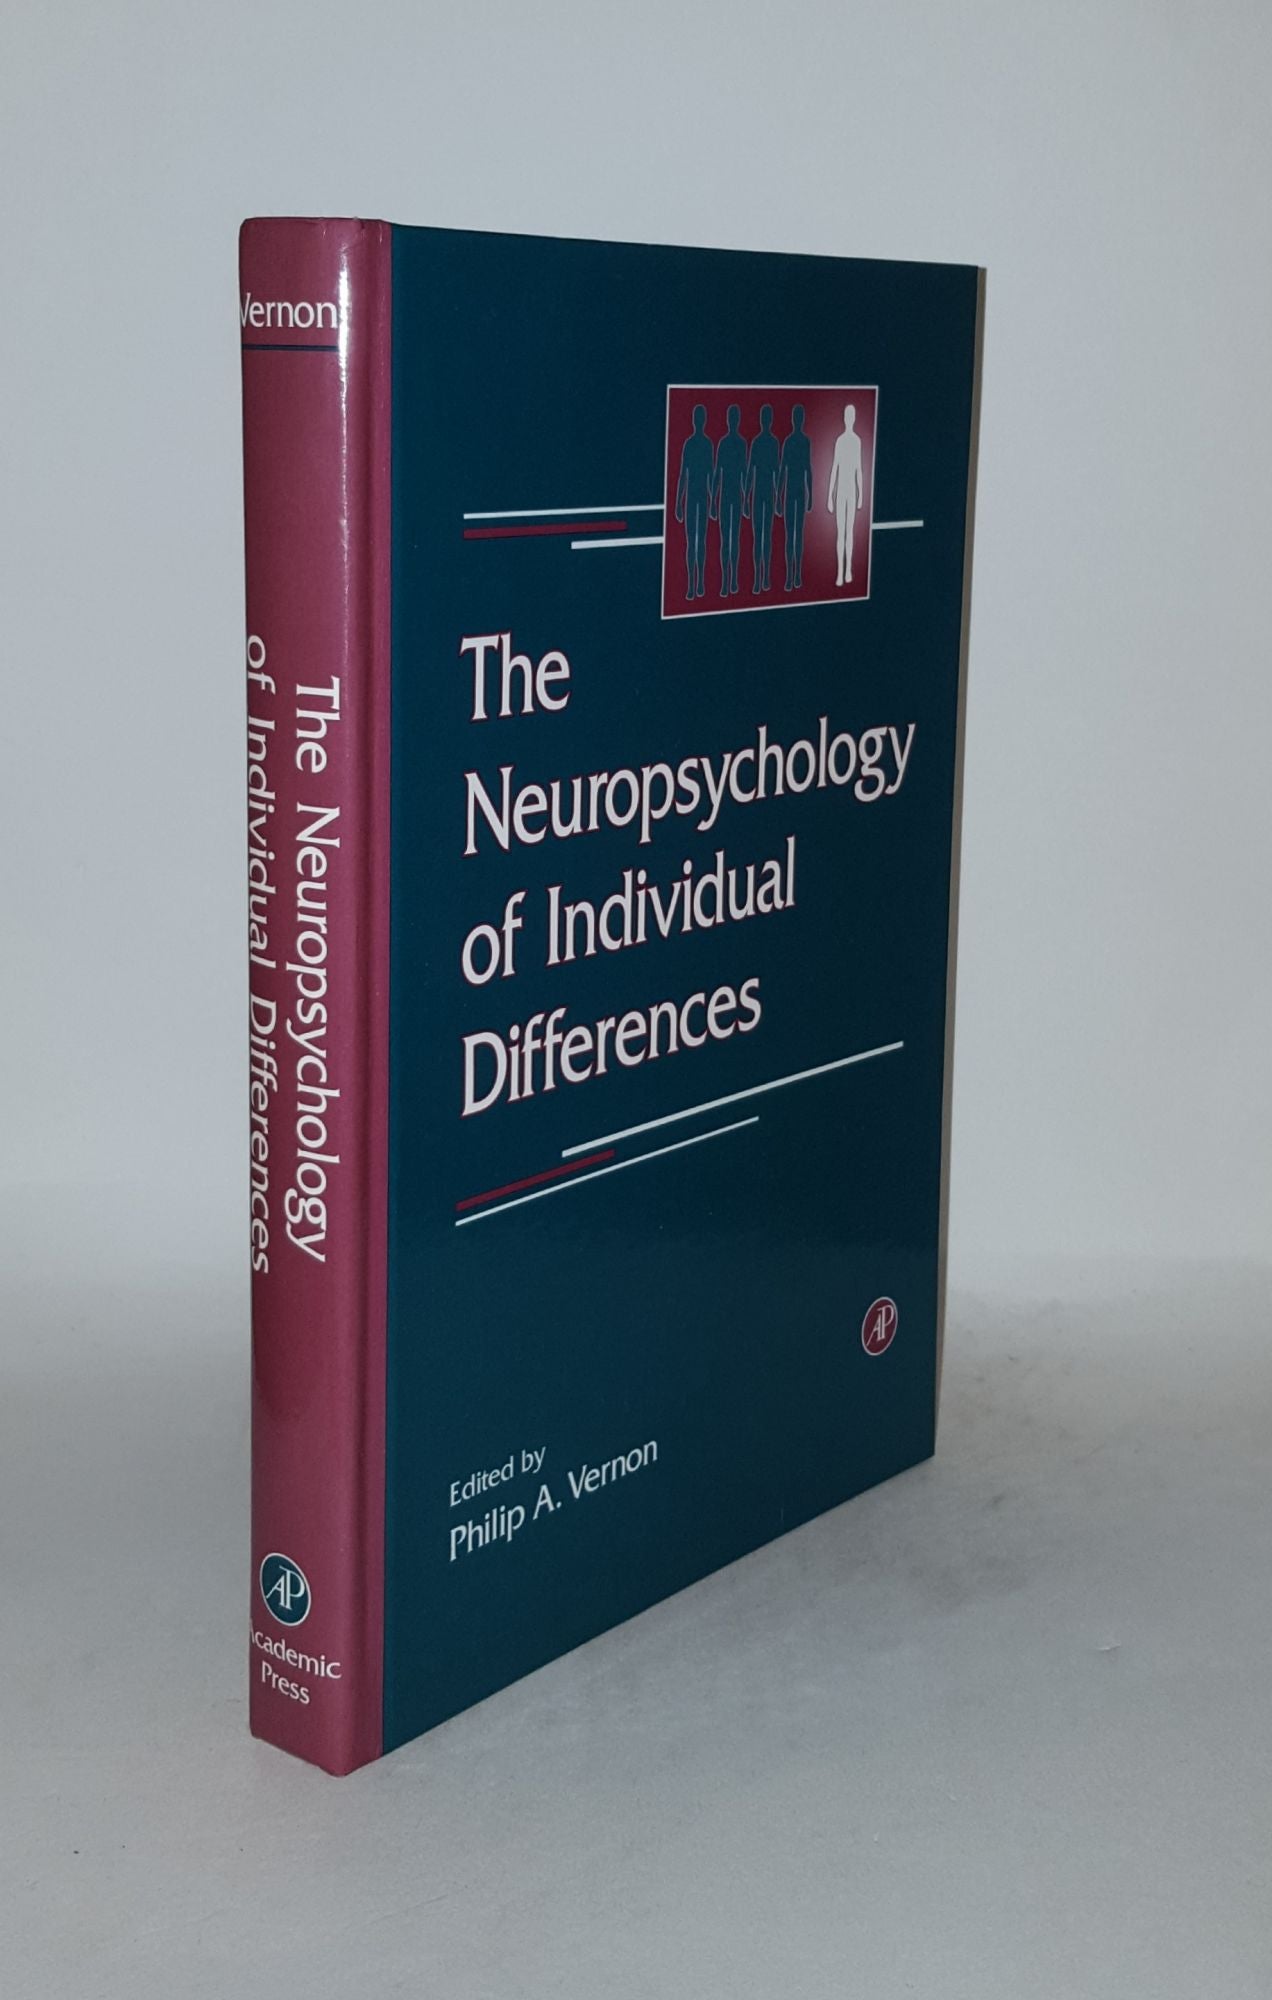 VERNON Philip A. - The Neuropsychology of Individual Differences